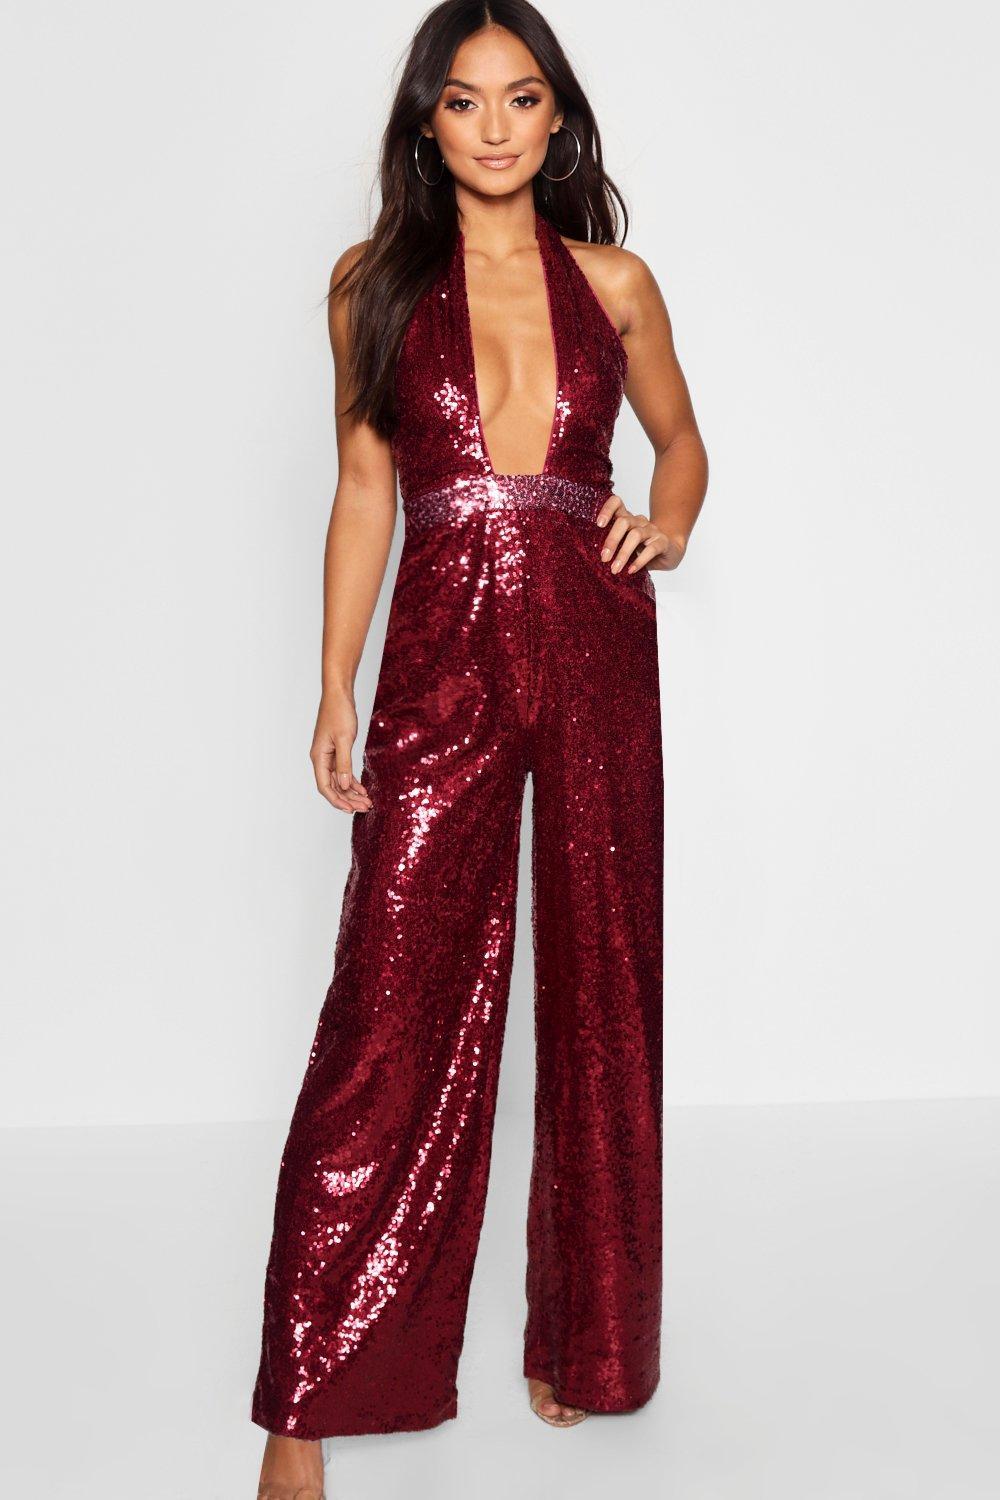 Boohoo Synthetic Petite Sequin Twist Wide Leg Pants in Berry (Red) - Lyst